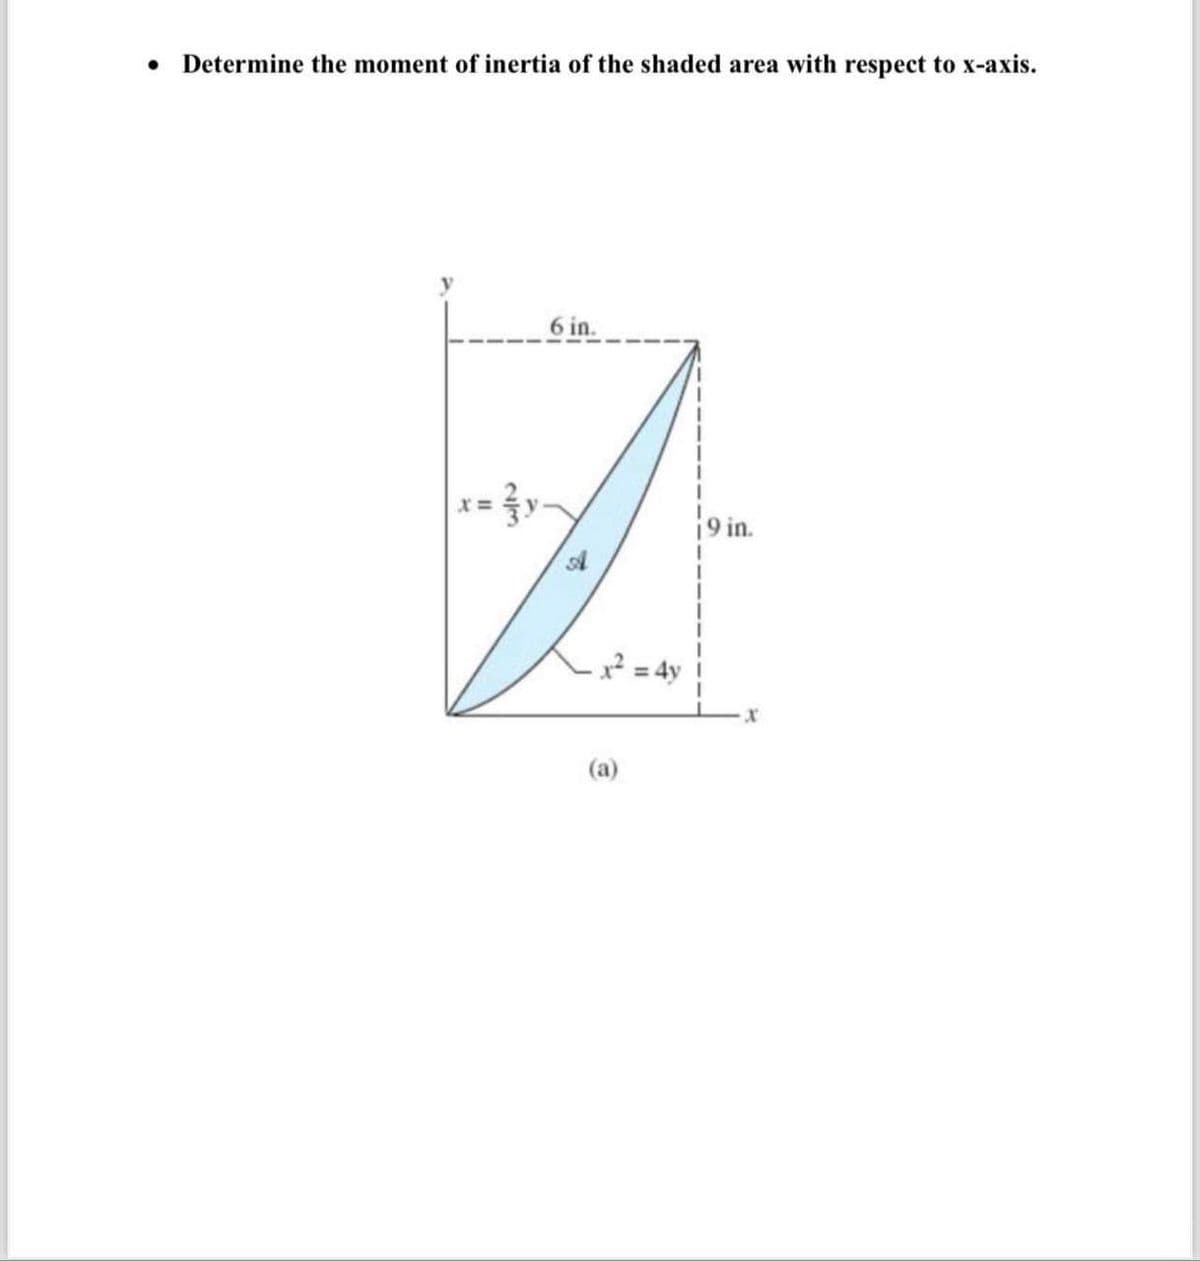 •
Determine the moment of inertia of the shaded area with respect to x-axis.
6 in.
21/3
76
9 in.
(a)
X